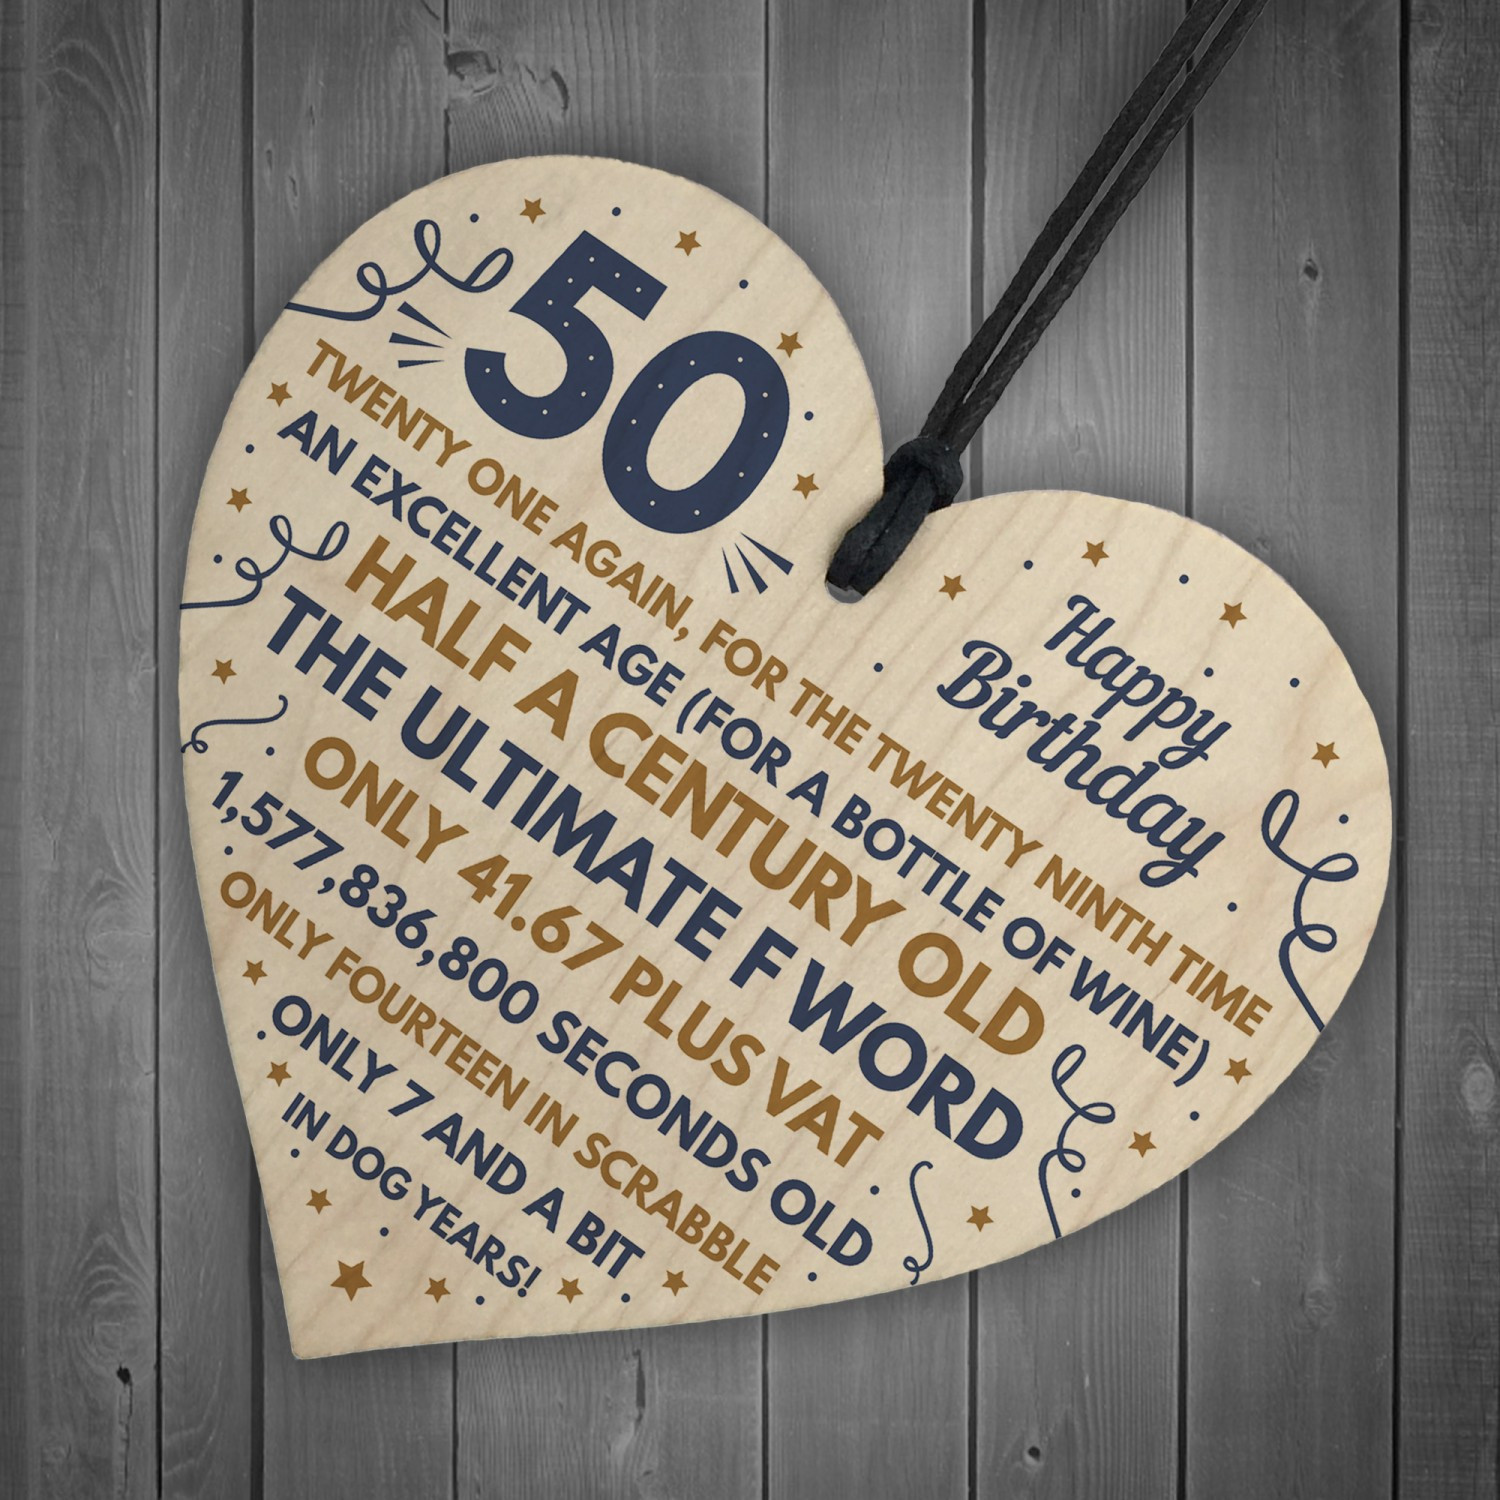 Funny 50th Birthday Gifts For Men
 Funny 50th Birthday Gifts For Men Women Wooden Heart